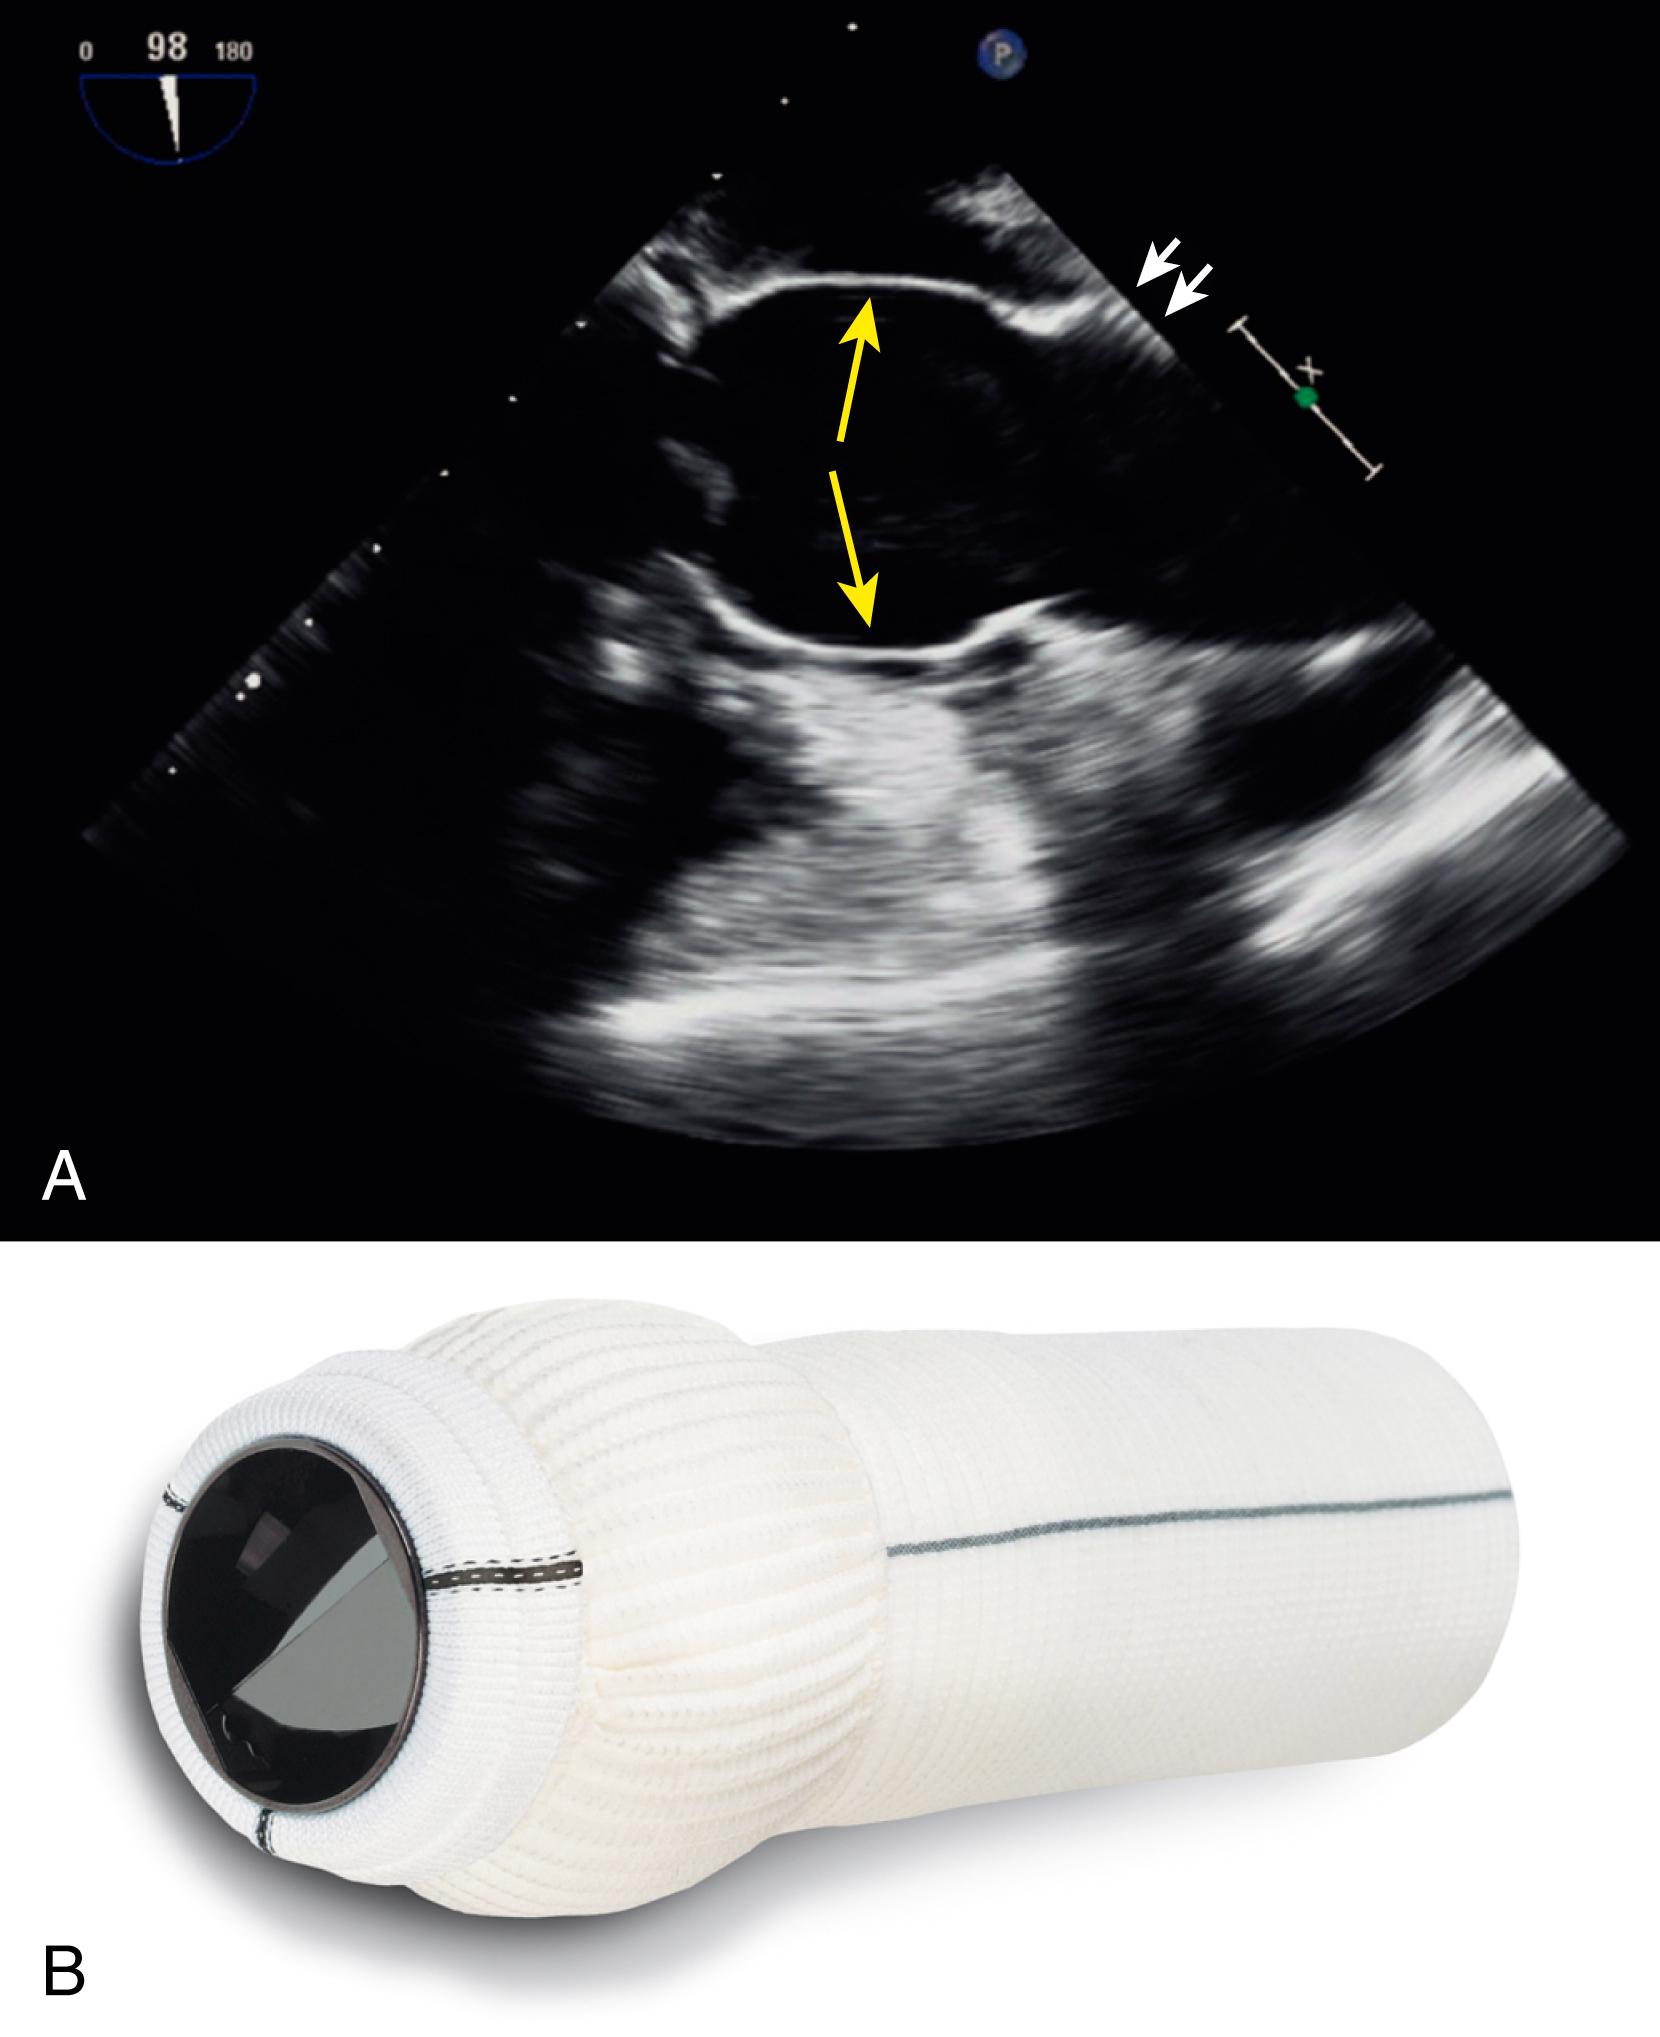 Figure 137.2, A, Transesophageal echocardiogram (longitudinal view of the aorta) illustrates a Valsalva graft. The large yellow arrows indicate the portion of the graft that recreates the sinuses of Valsalva. The small white arrows indicate the “corrugated” appearance of grafts seen on echo. B, An actual composite Vascutek Gelweave Valsalva graft with a mechanical bileaflet tilting disc prosthetic valve.